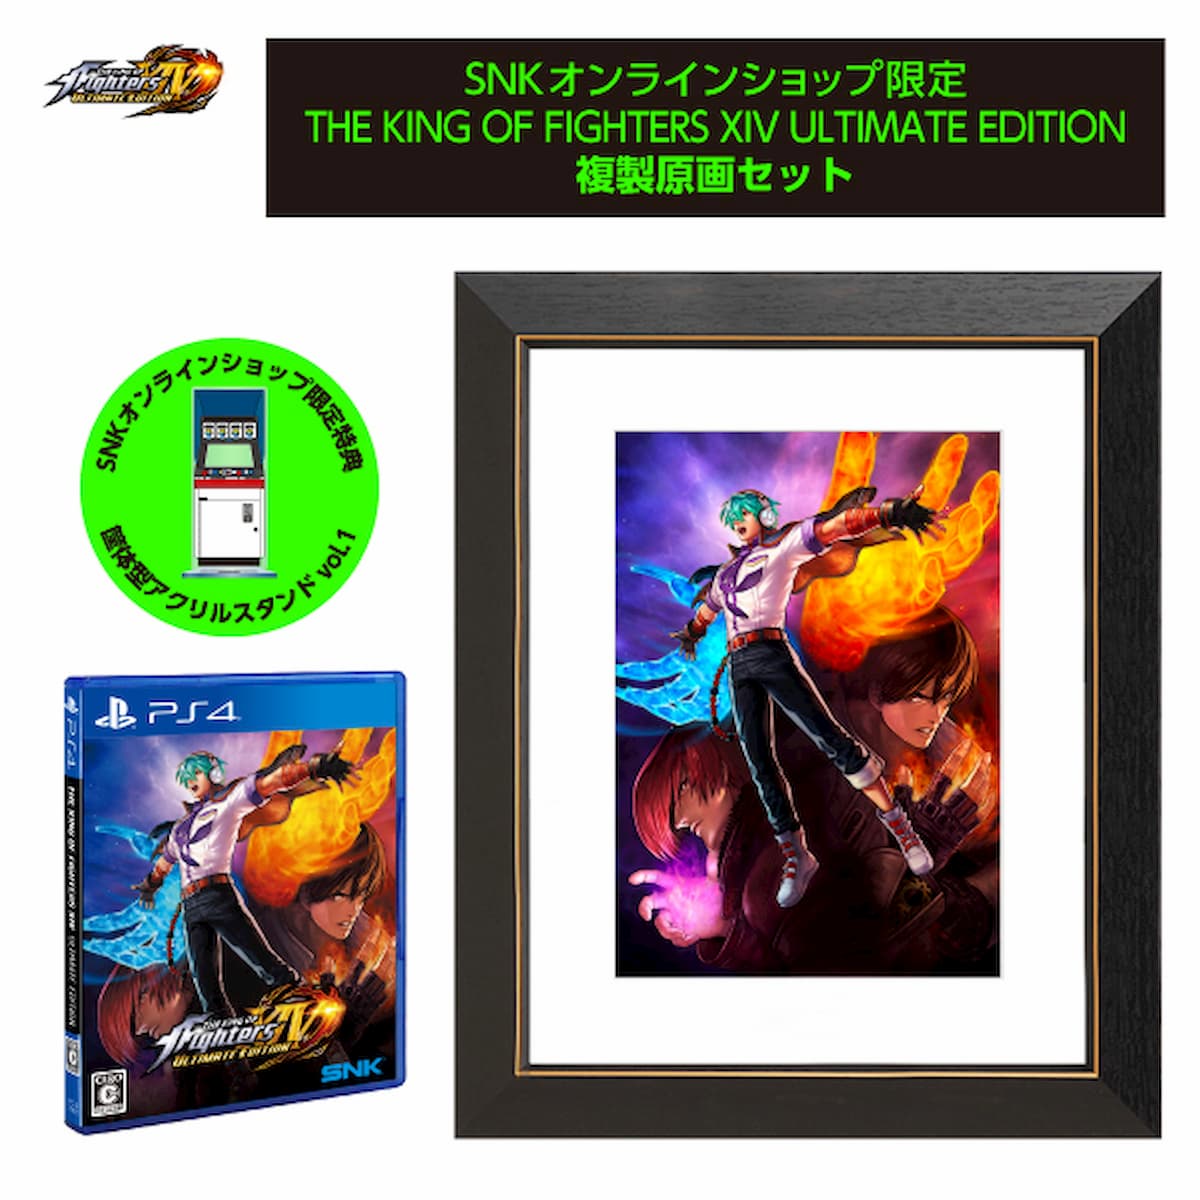 THE KING OF FIGHTERS XIV ULTIMATE EDITION 複製原画セット - PS4